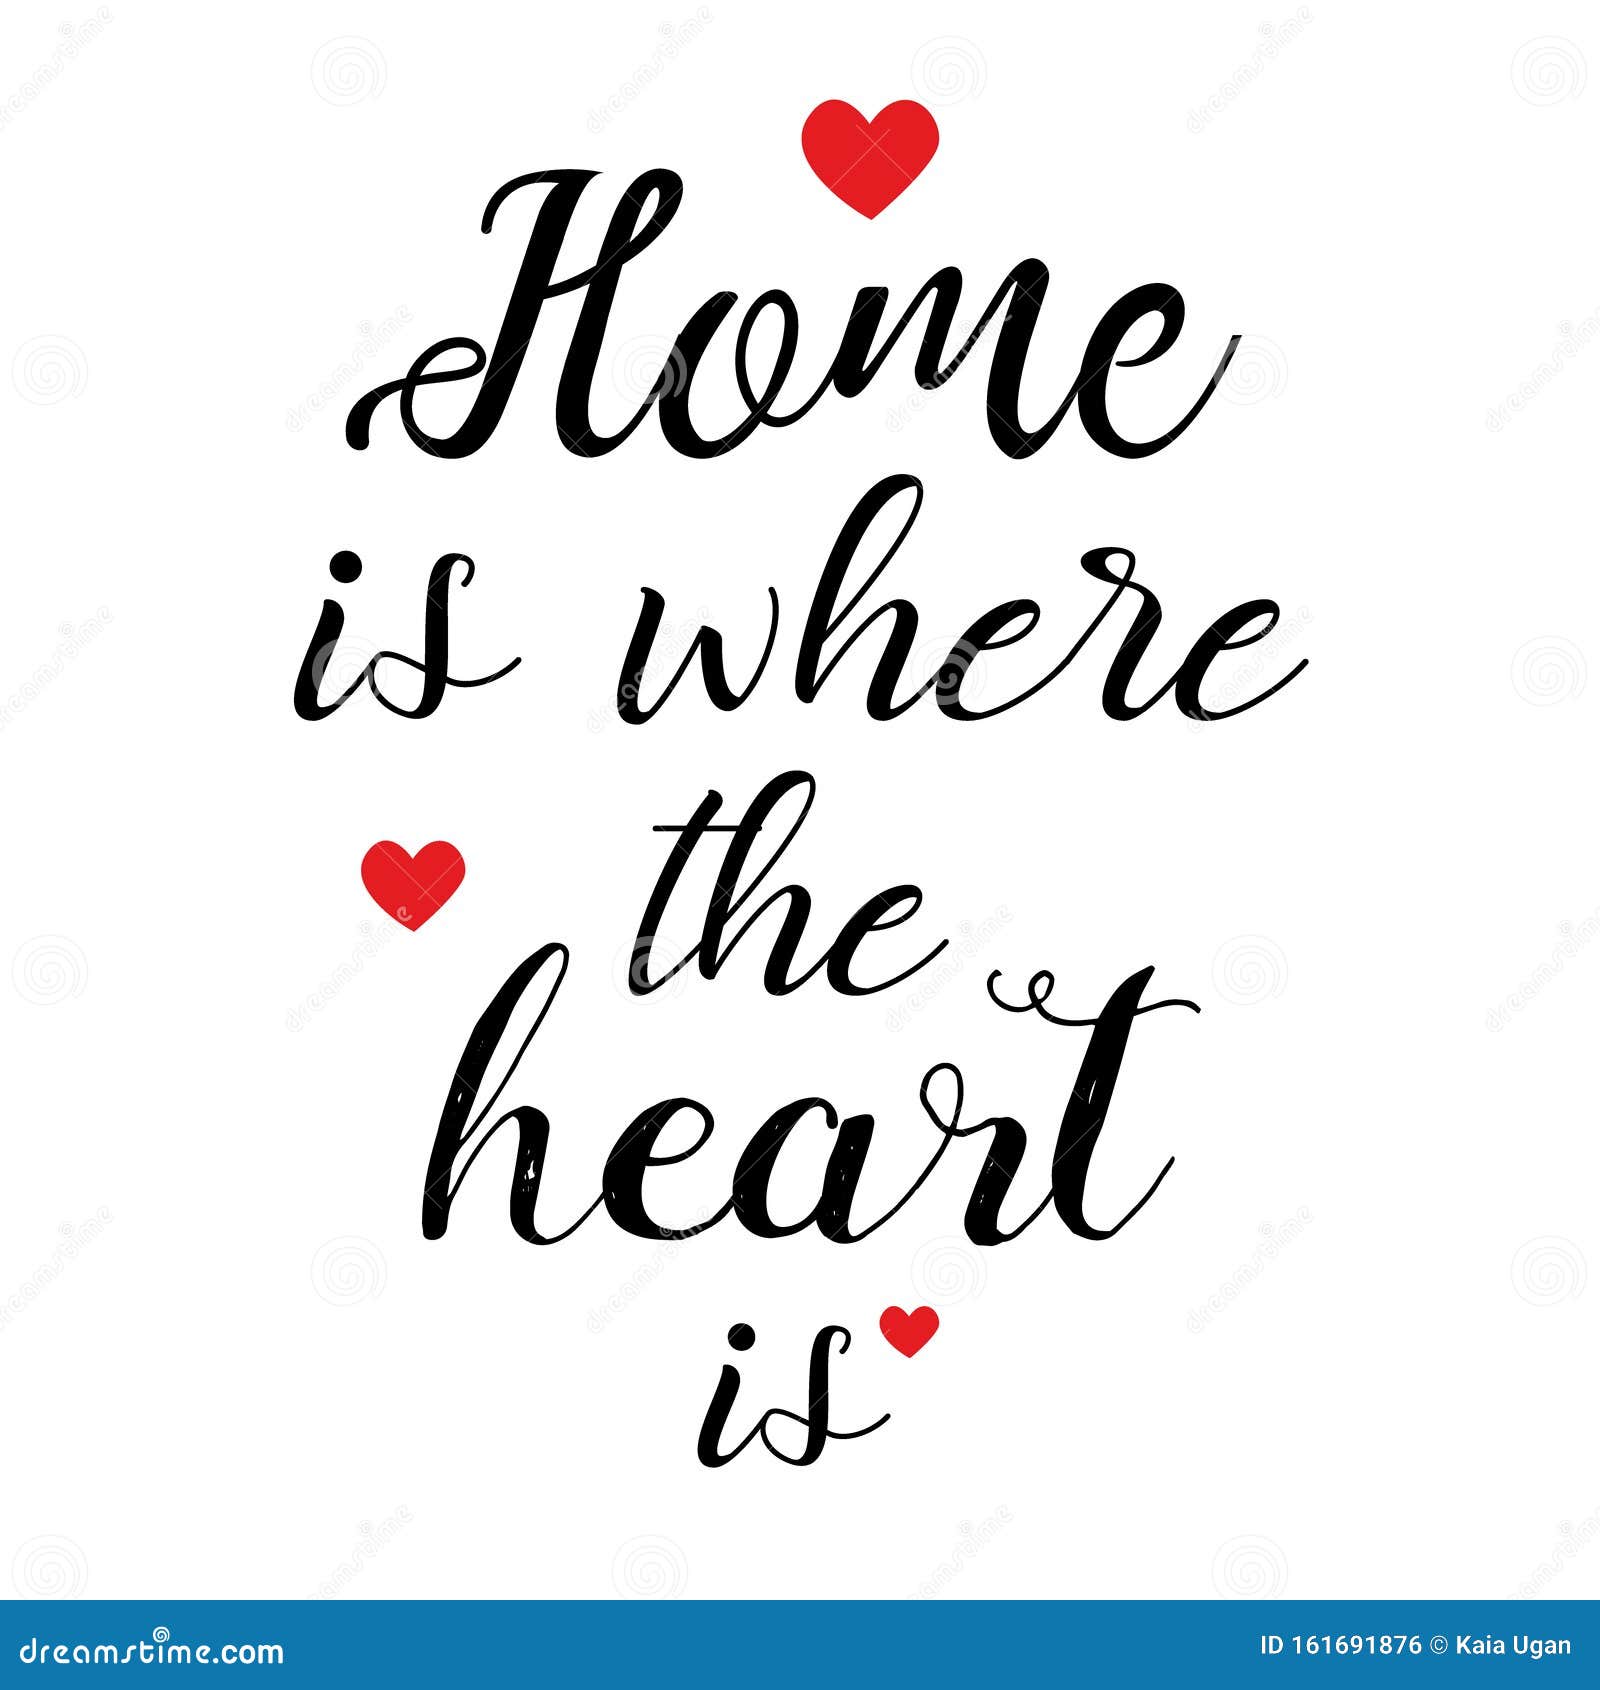 Home Is Where The Heart Is Hand Drawn Illustration With Hand Lettering Stock Illustration Illustration Of Concept Letter 161691876,What Is The Biggest Cruise Ship In The World 2020